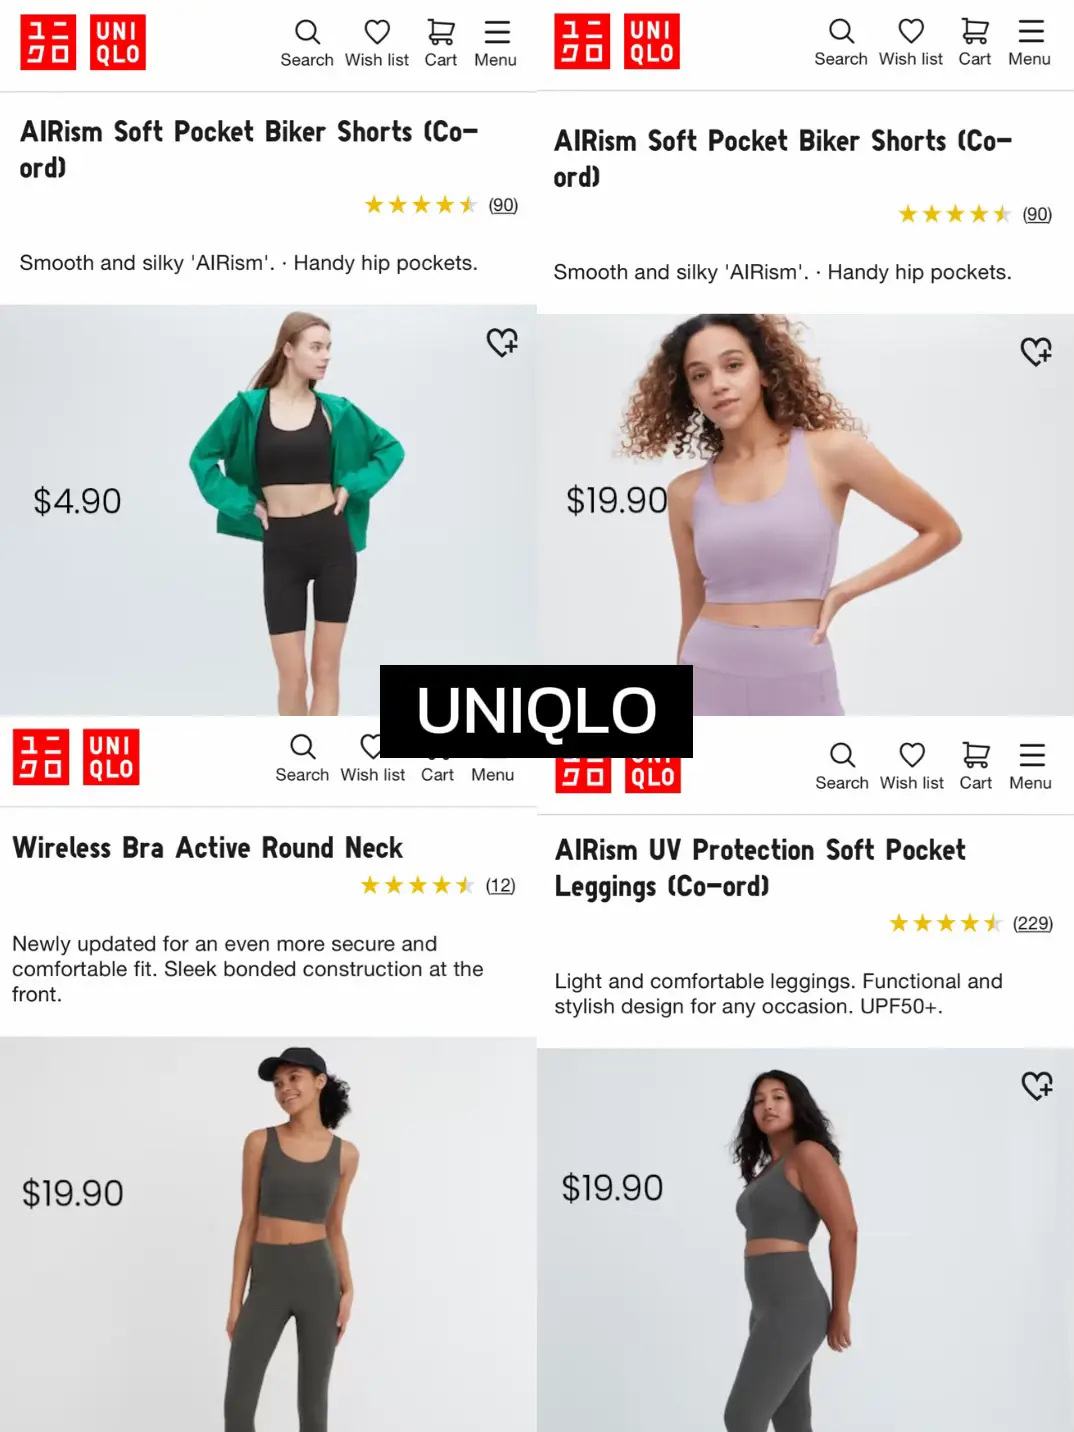 Uniqlo Seamless Half Bra Camisole (Crop Top), Women's Fashion, Tops, Other  Tops on Carousell